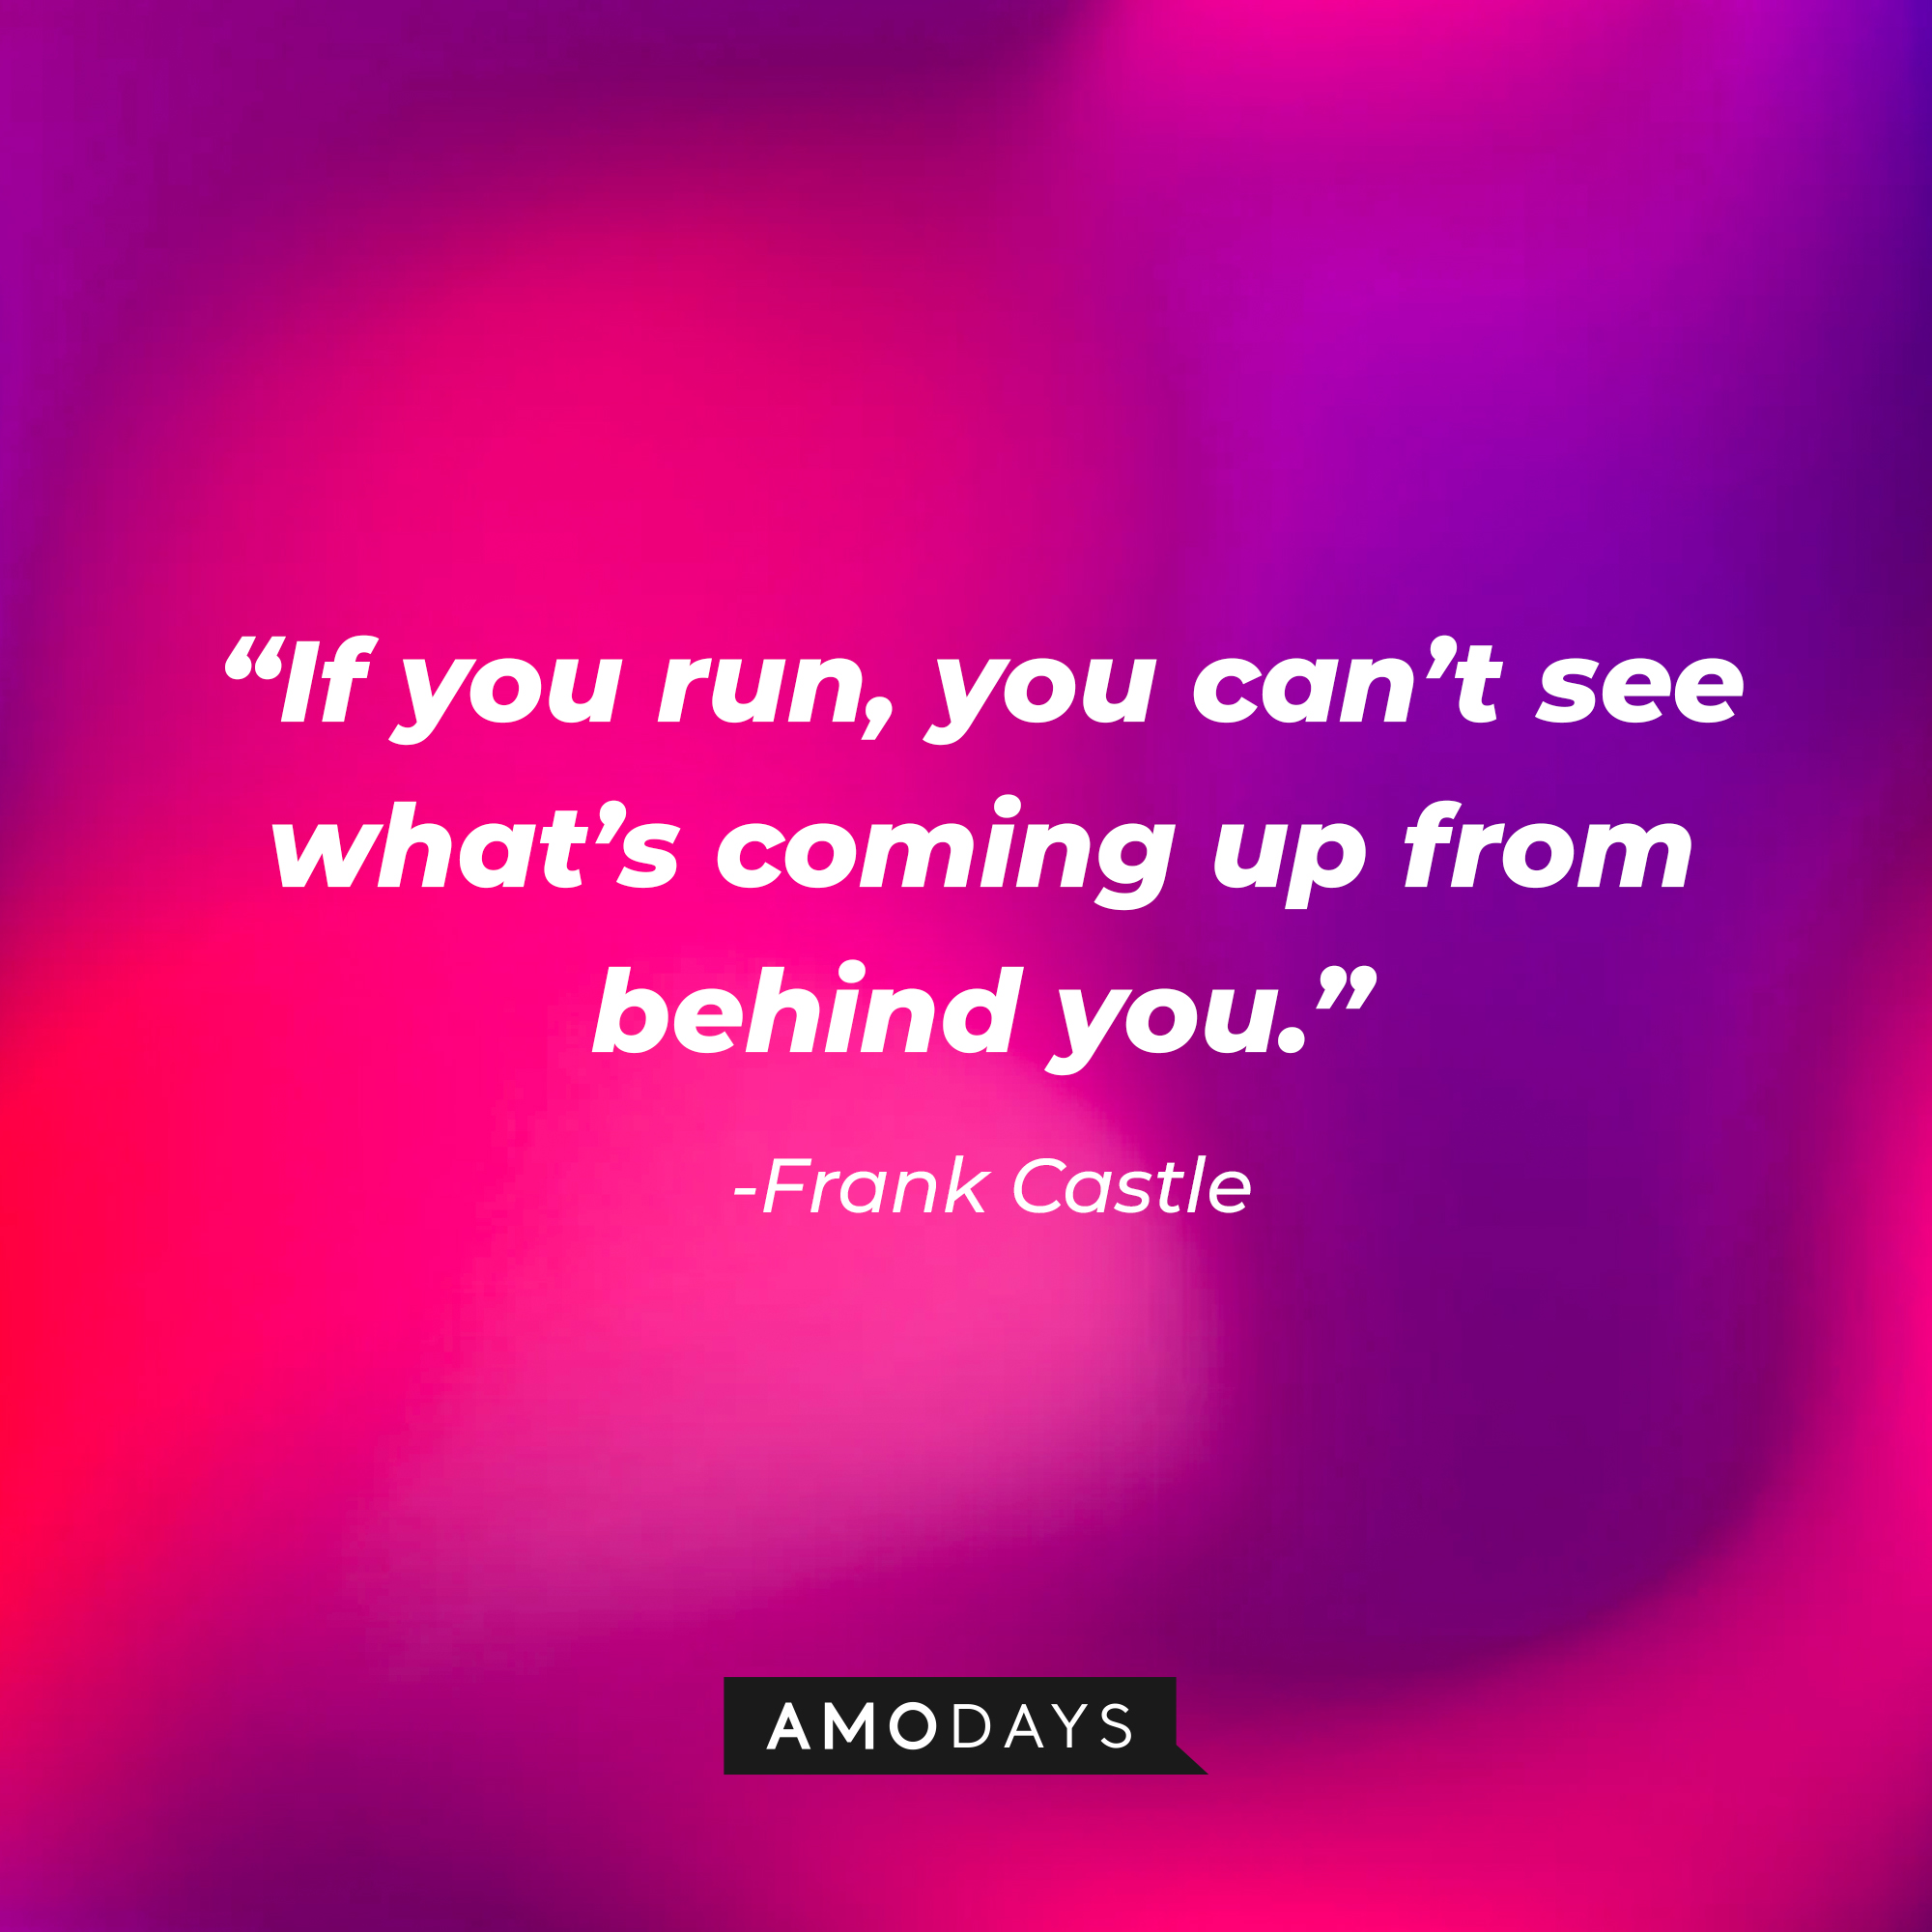 Frank Castle’s quote: “If you run, you can’t see what’s coming up from behind you.” | Source: AmoDays